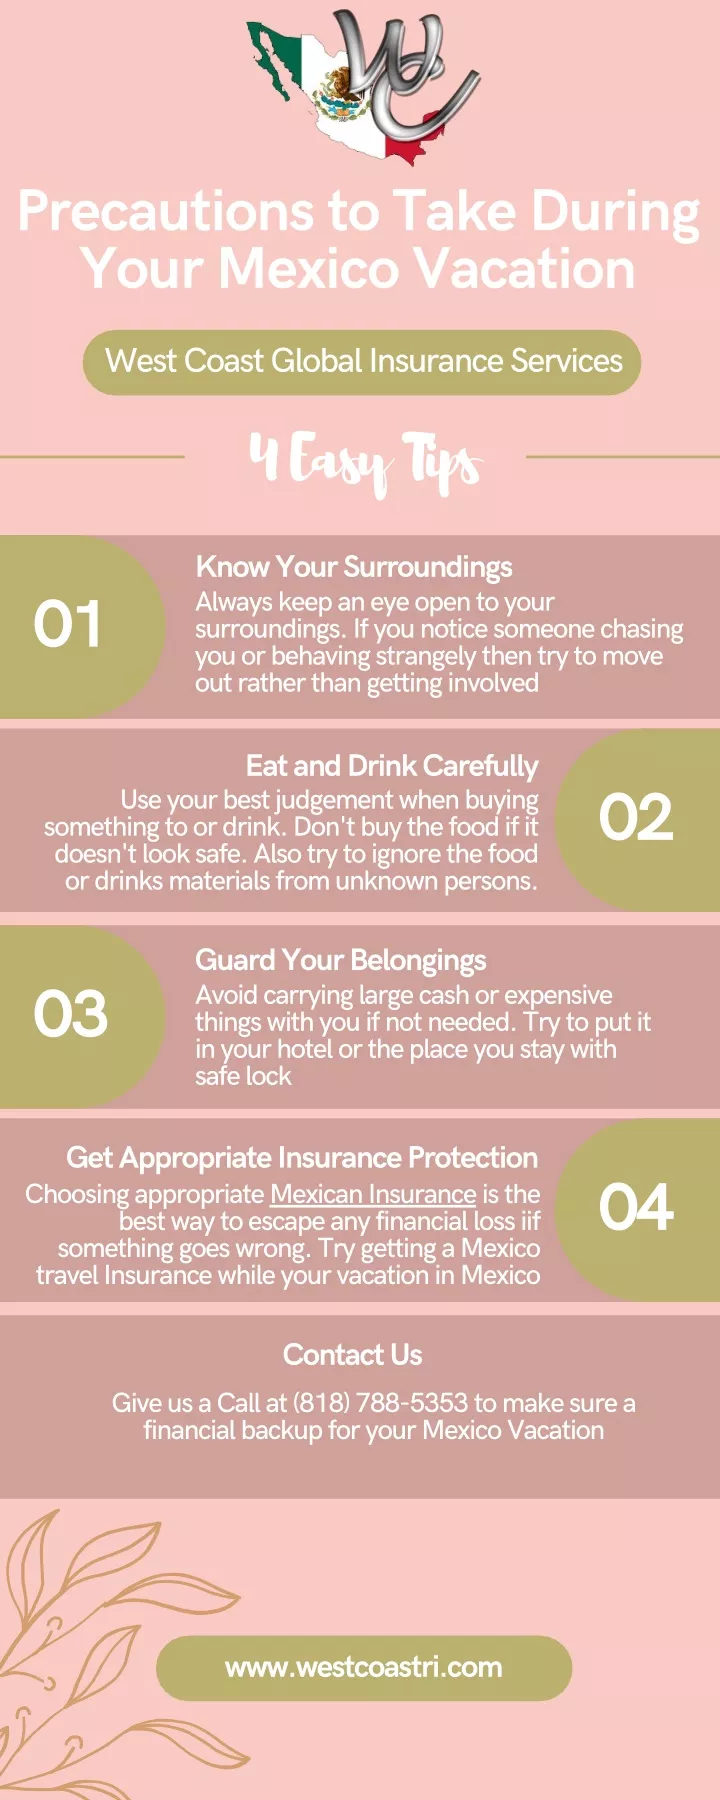 precautions to take during your mexico vacation